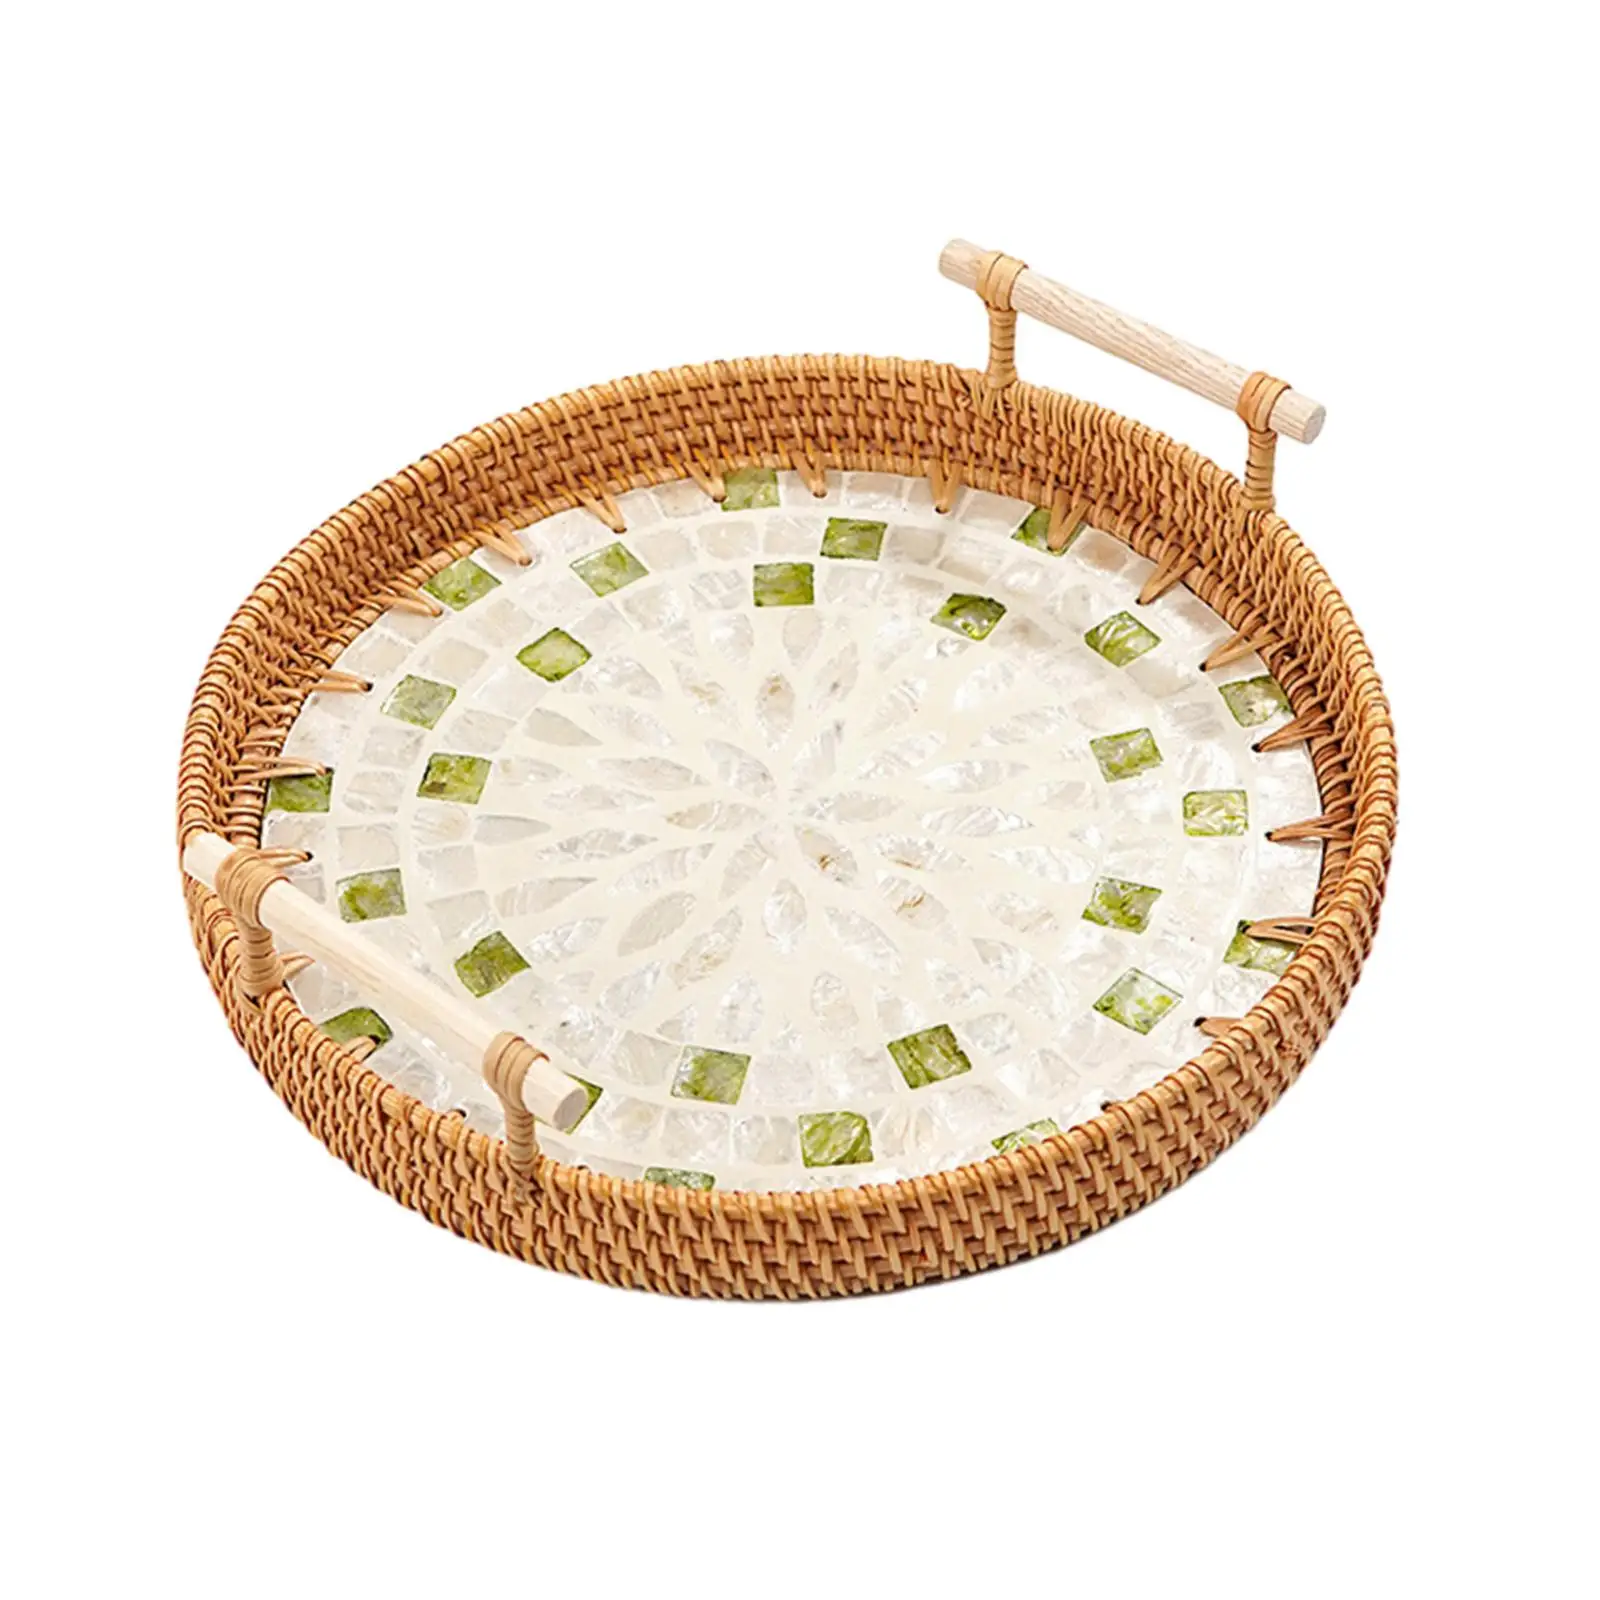 Woven Rattan Serving Tray with Handles Breakfast Cake Snacks Tray for Coffee Table Afternoon Tea Living Room Parties Countertop